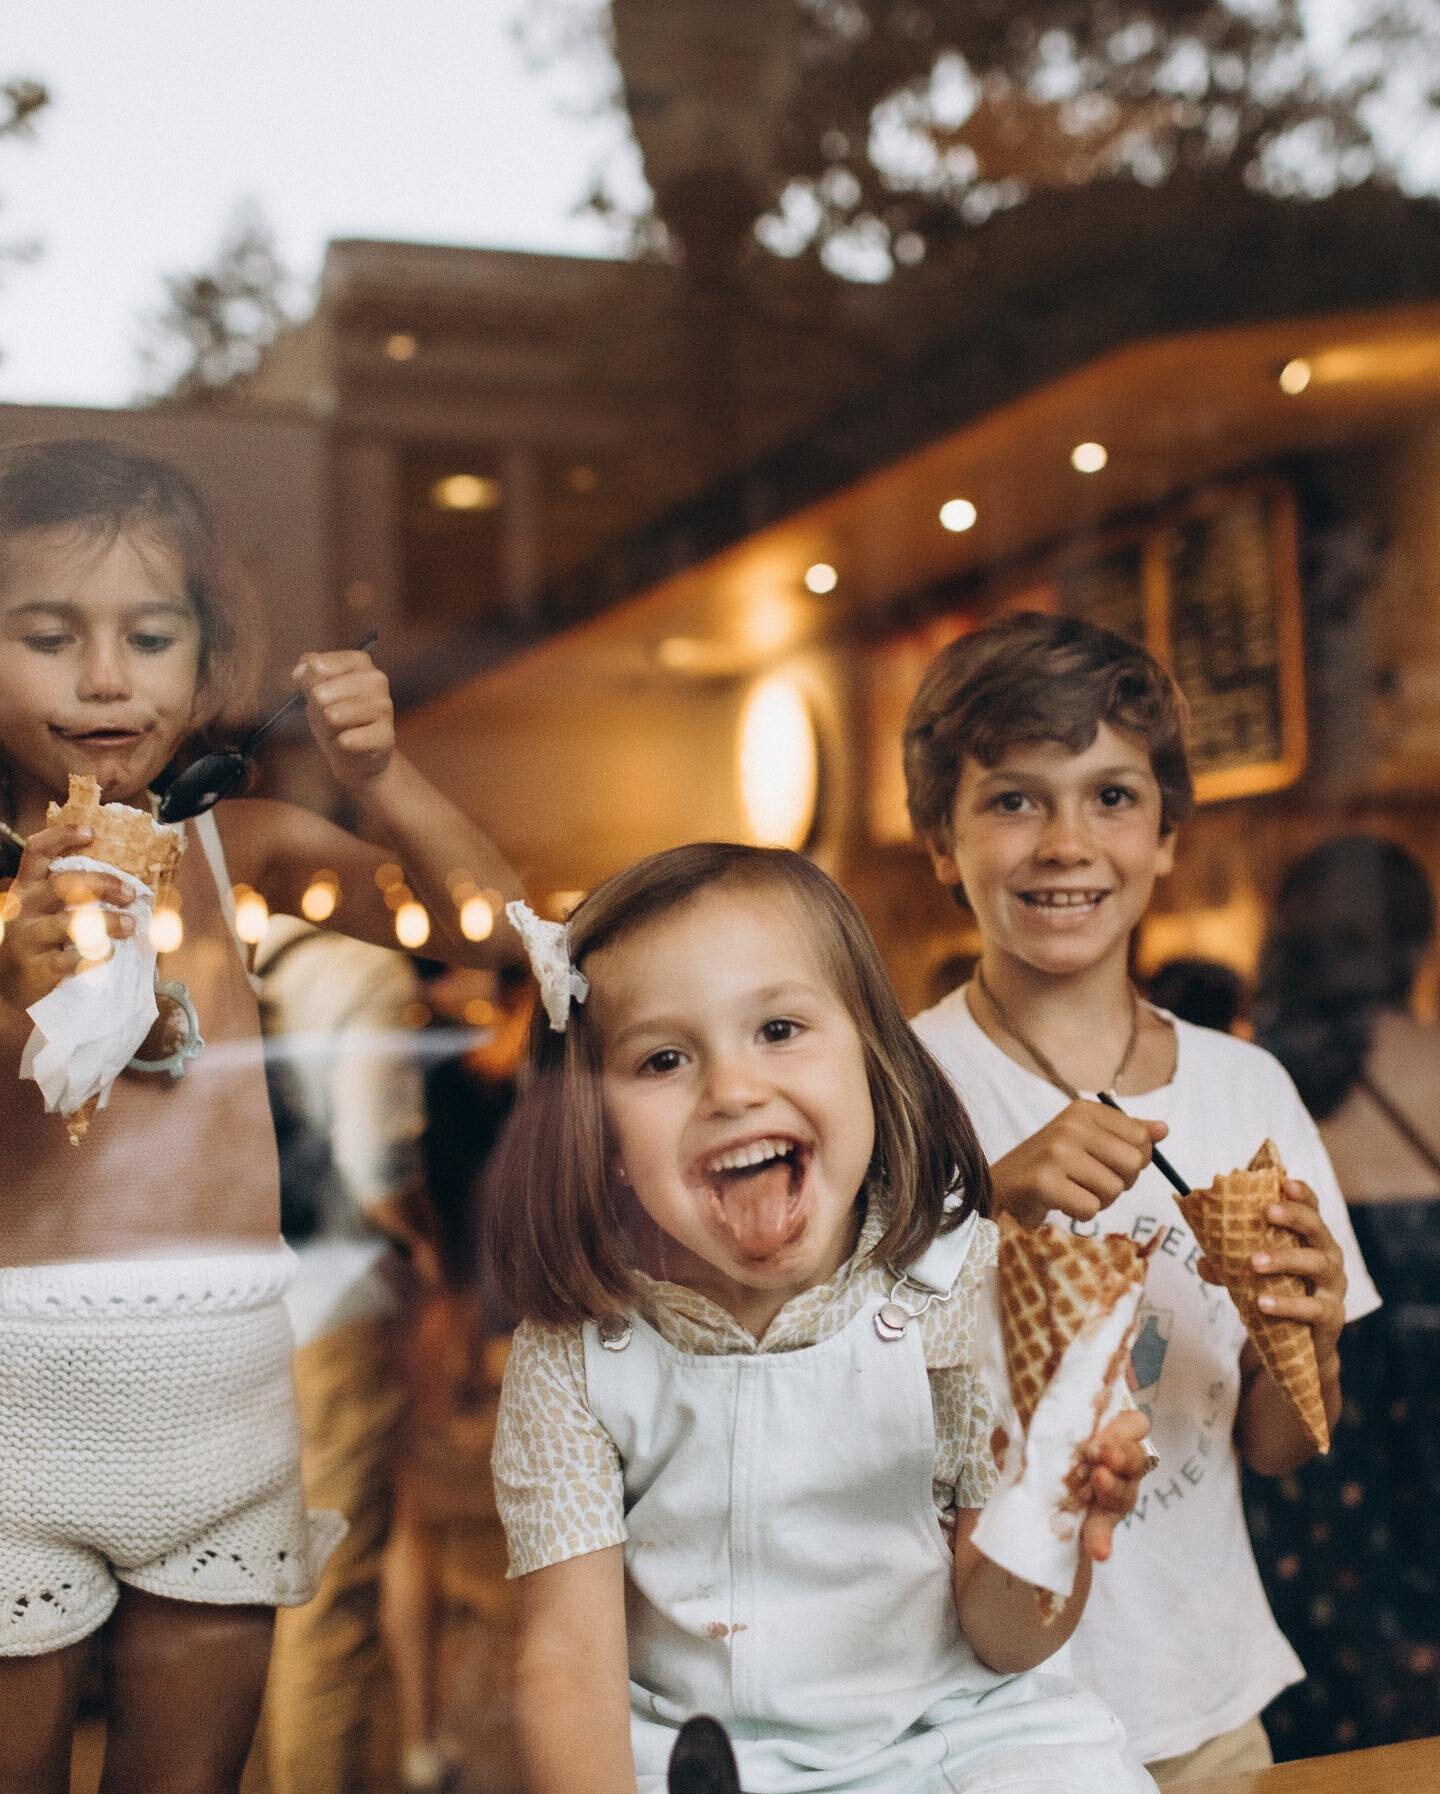 Three children eating ice cream; a girl with a big smile in the foreground, a boy behind her, and another girl to the left, all behind a glass window enjoying their ice cream.